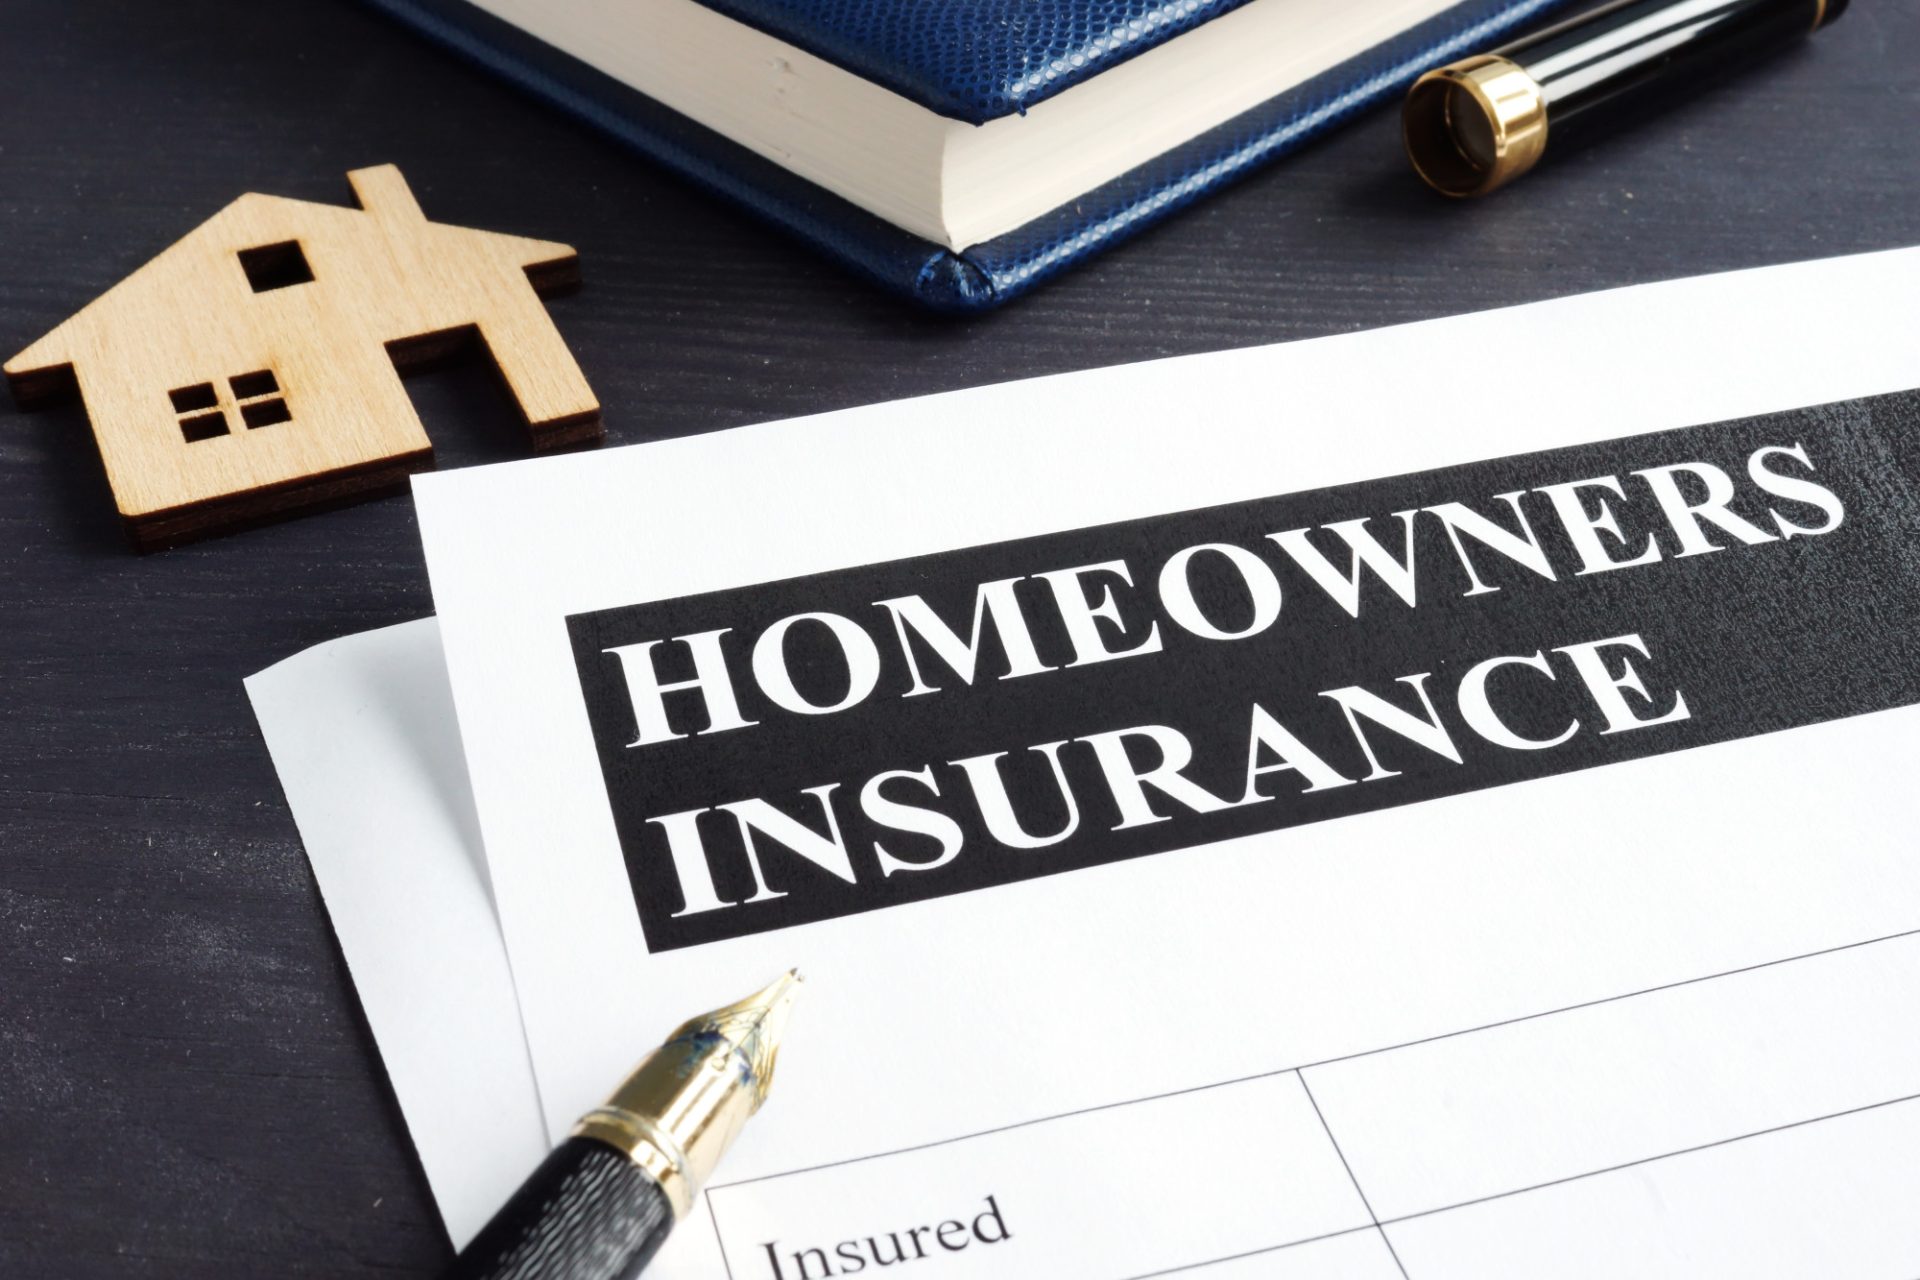 Home Warranty vs Homeowners Insurance: What Are the Differences?